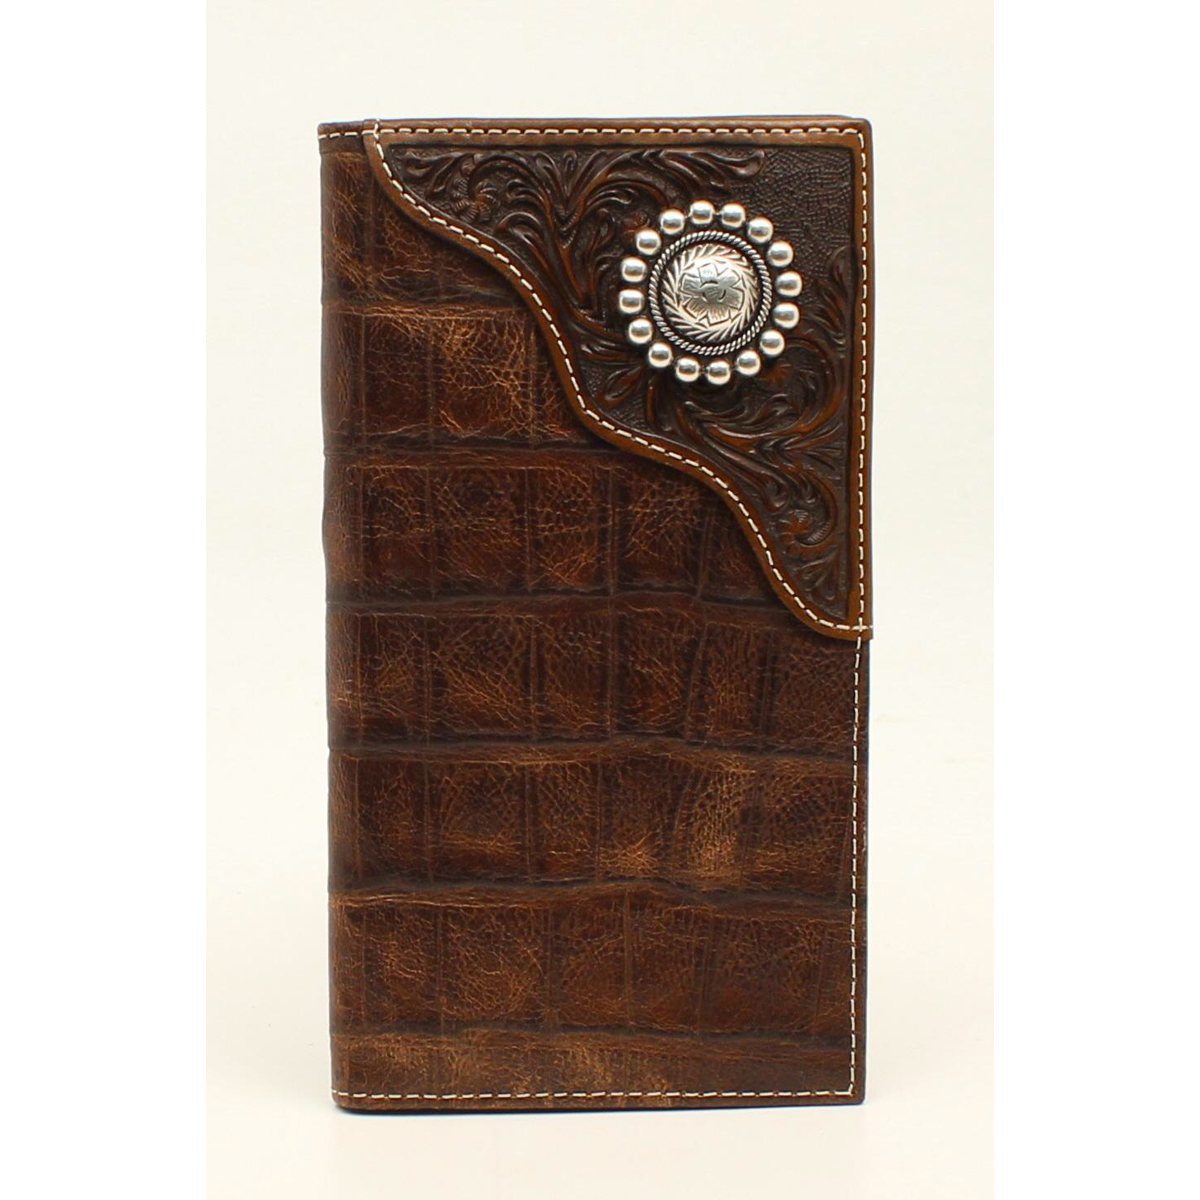 Ariat Rodeo Crocodile Wallet - Brown w/Round Concho